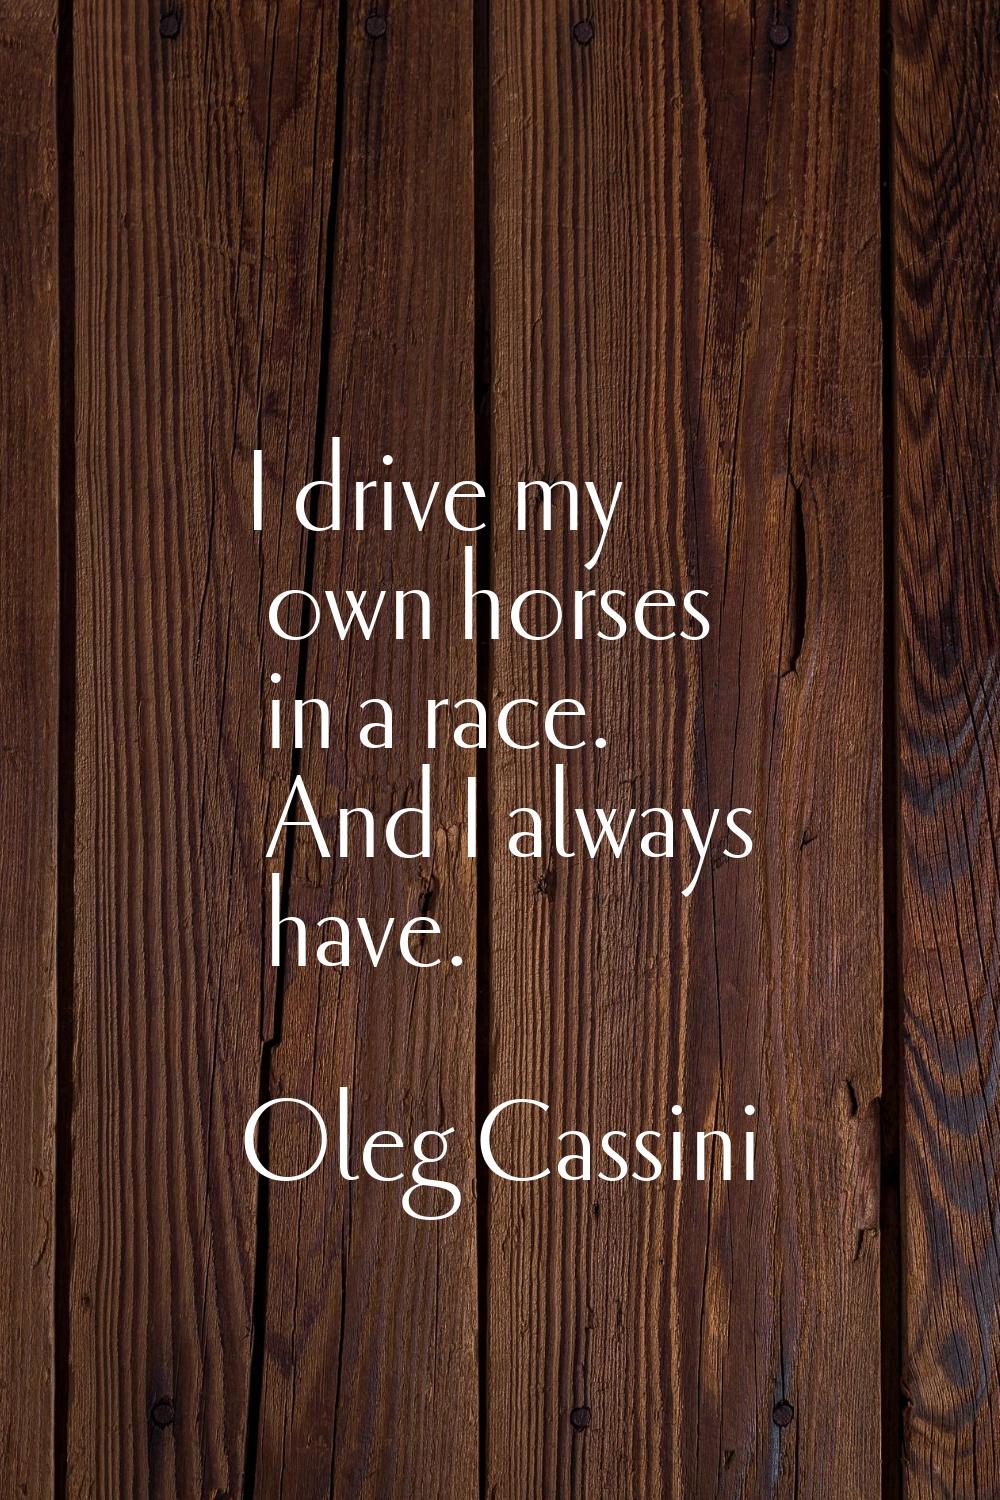 I drive my own horses in a race. And I always have.